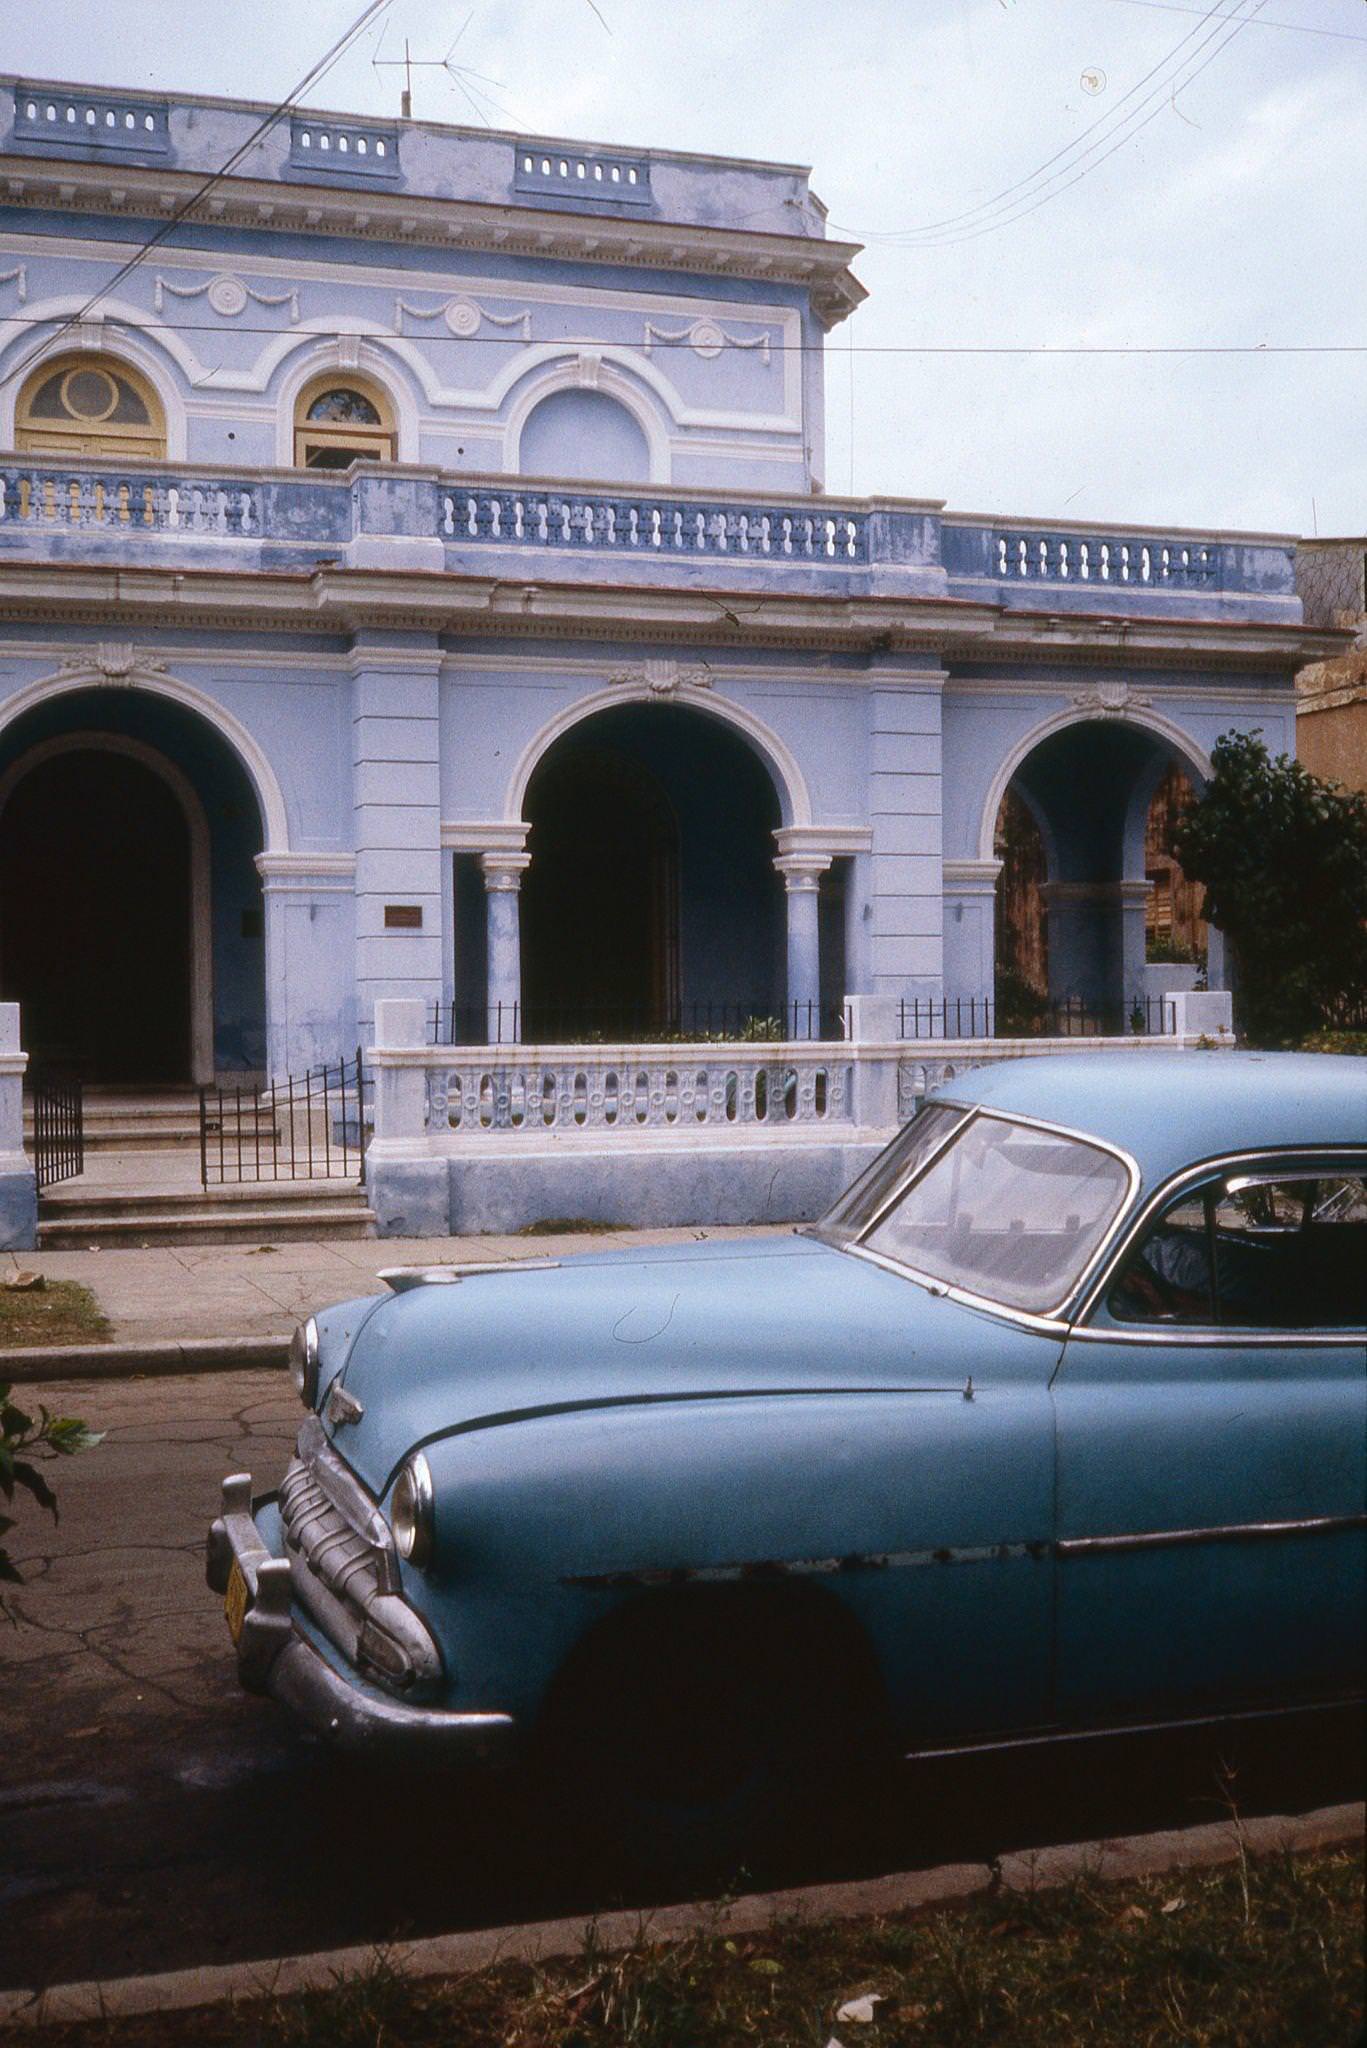 View across the hood of a dilapidated 1952 Chevrolet Deluxe parked outside a residential mansion in the Miramar neighborhood, Havana, Cuba, January 1983.